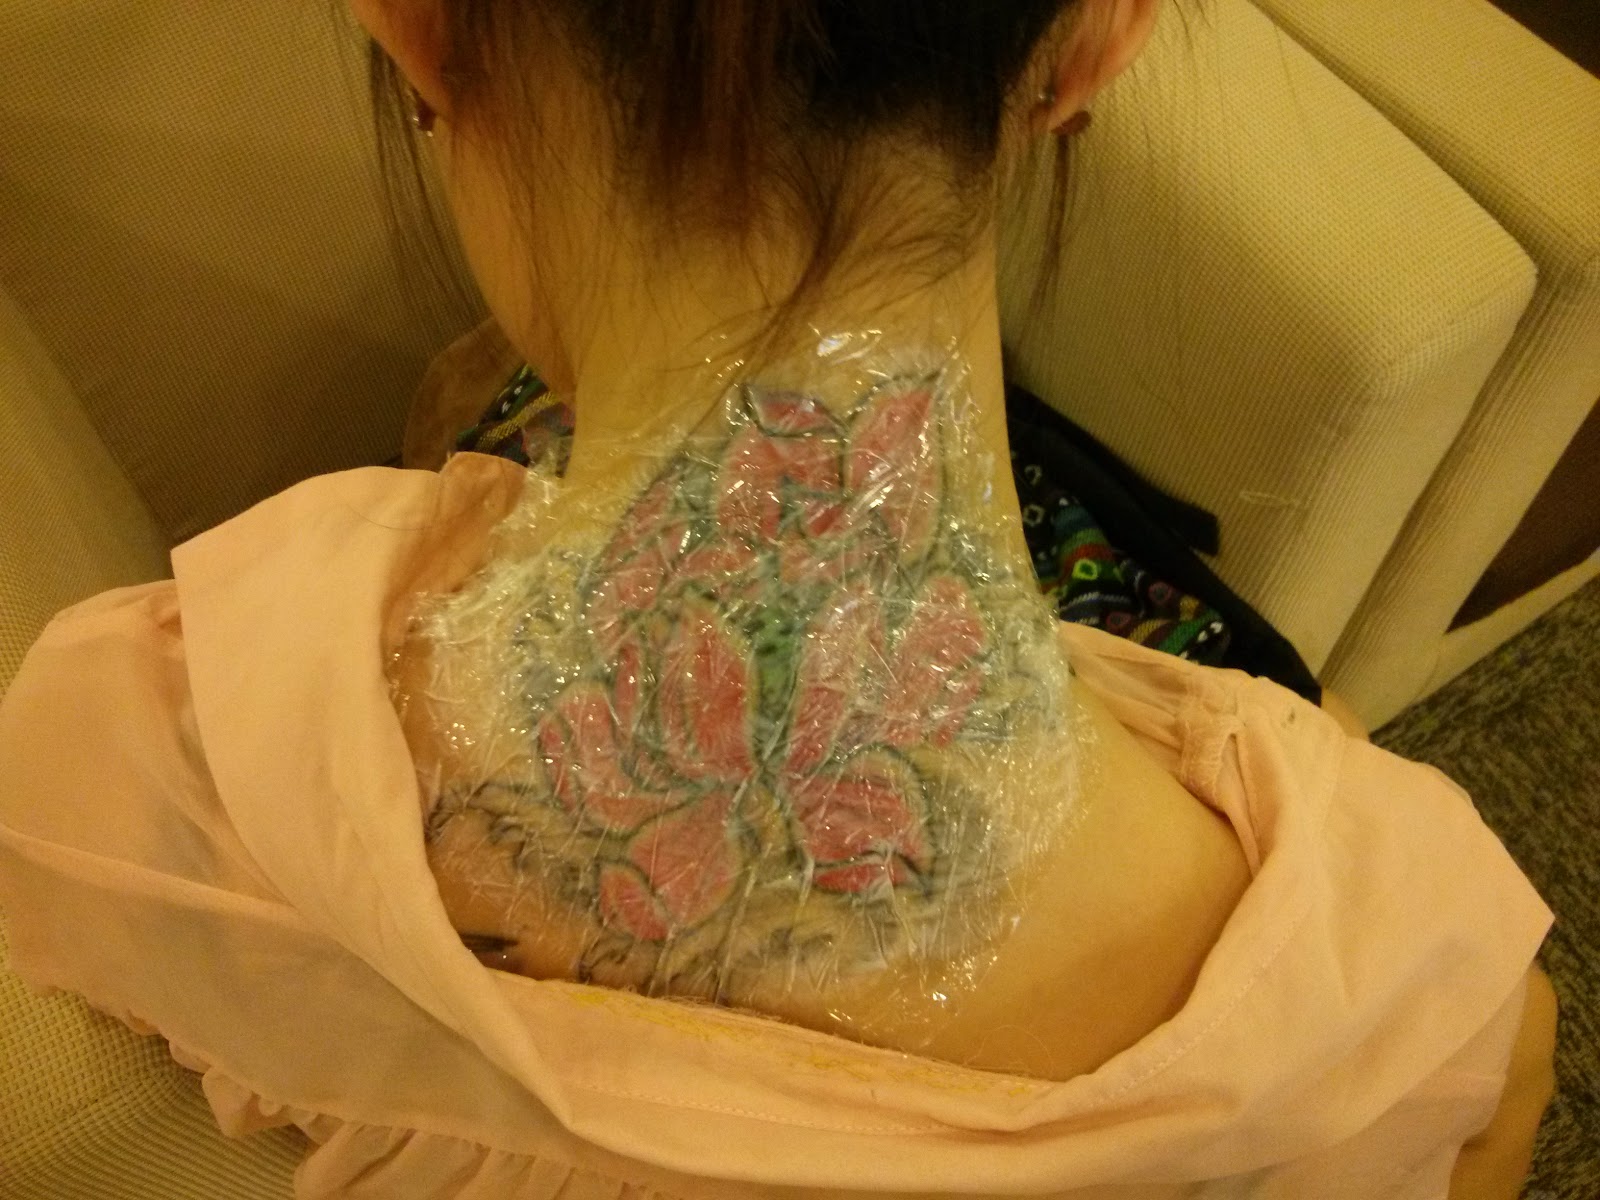 Removing the left over - Tattoo Removal Process: March 4 